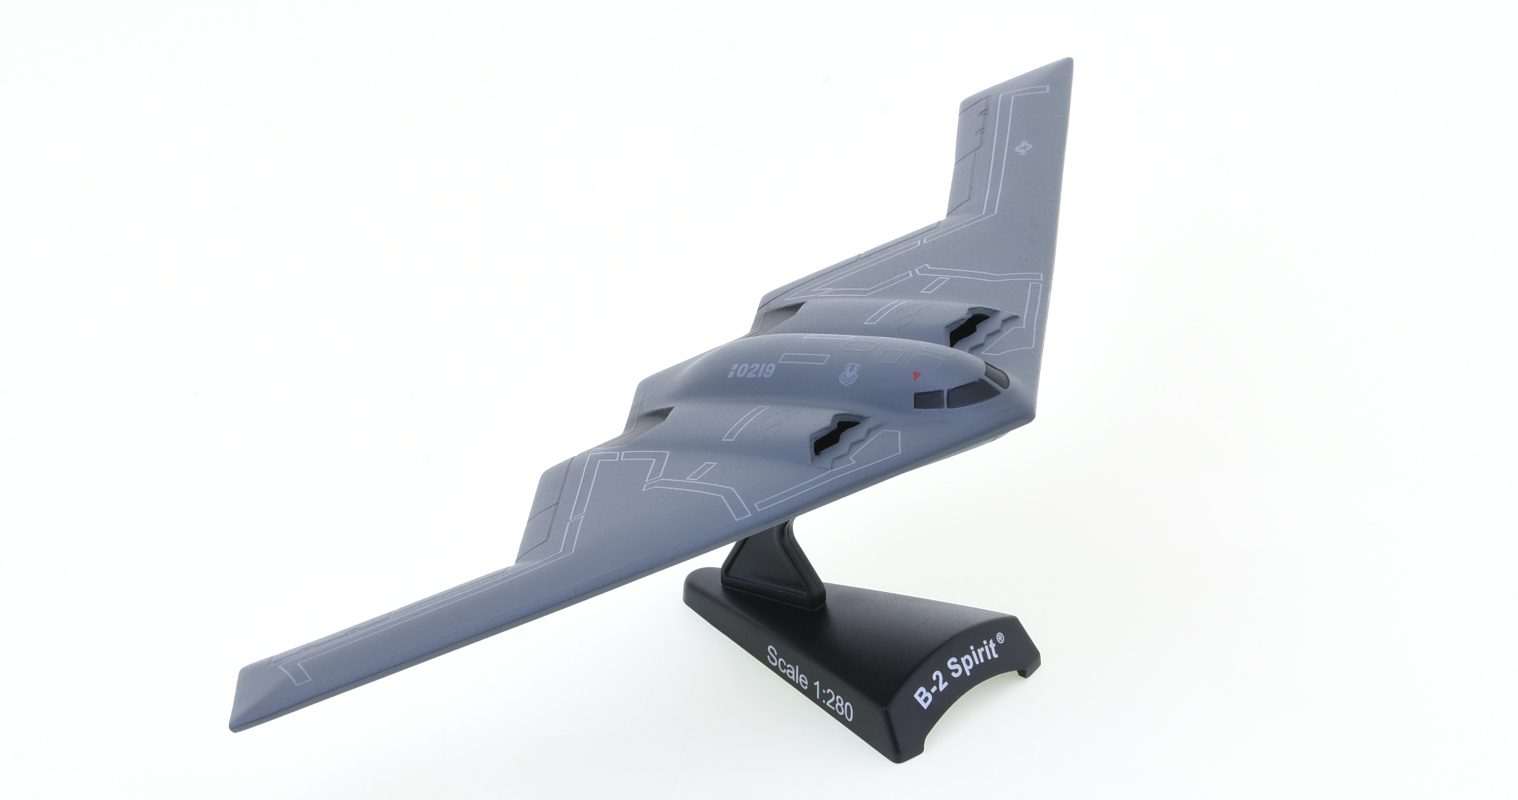 Front starboard side view of the Northrop Grumman B-2A Spirit 1/280 scale diecast model of the 509th BW, USAF, Whiteman AFB, Missouri, USA - Postage Stamp Collection PS5387